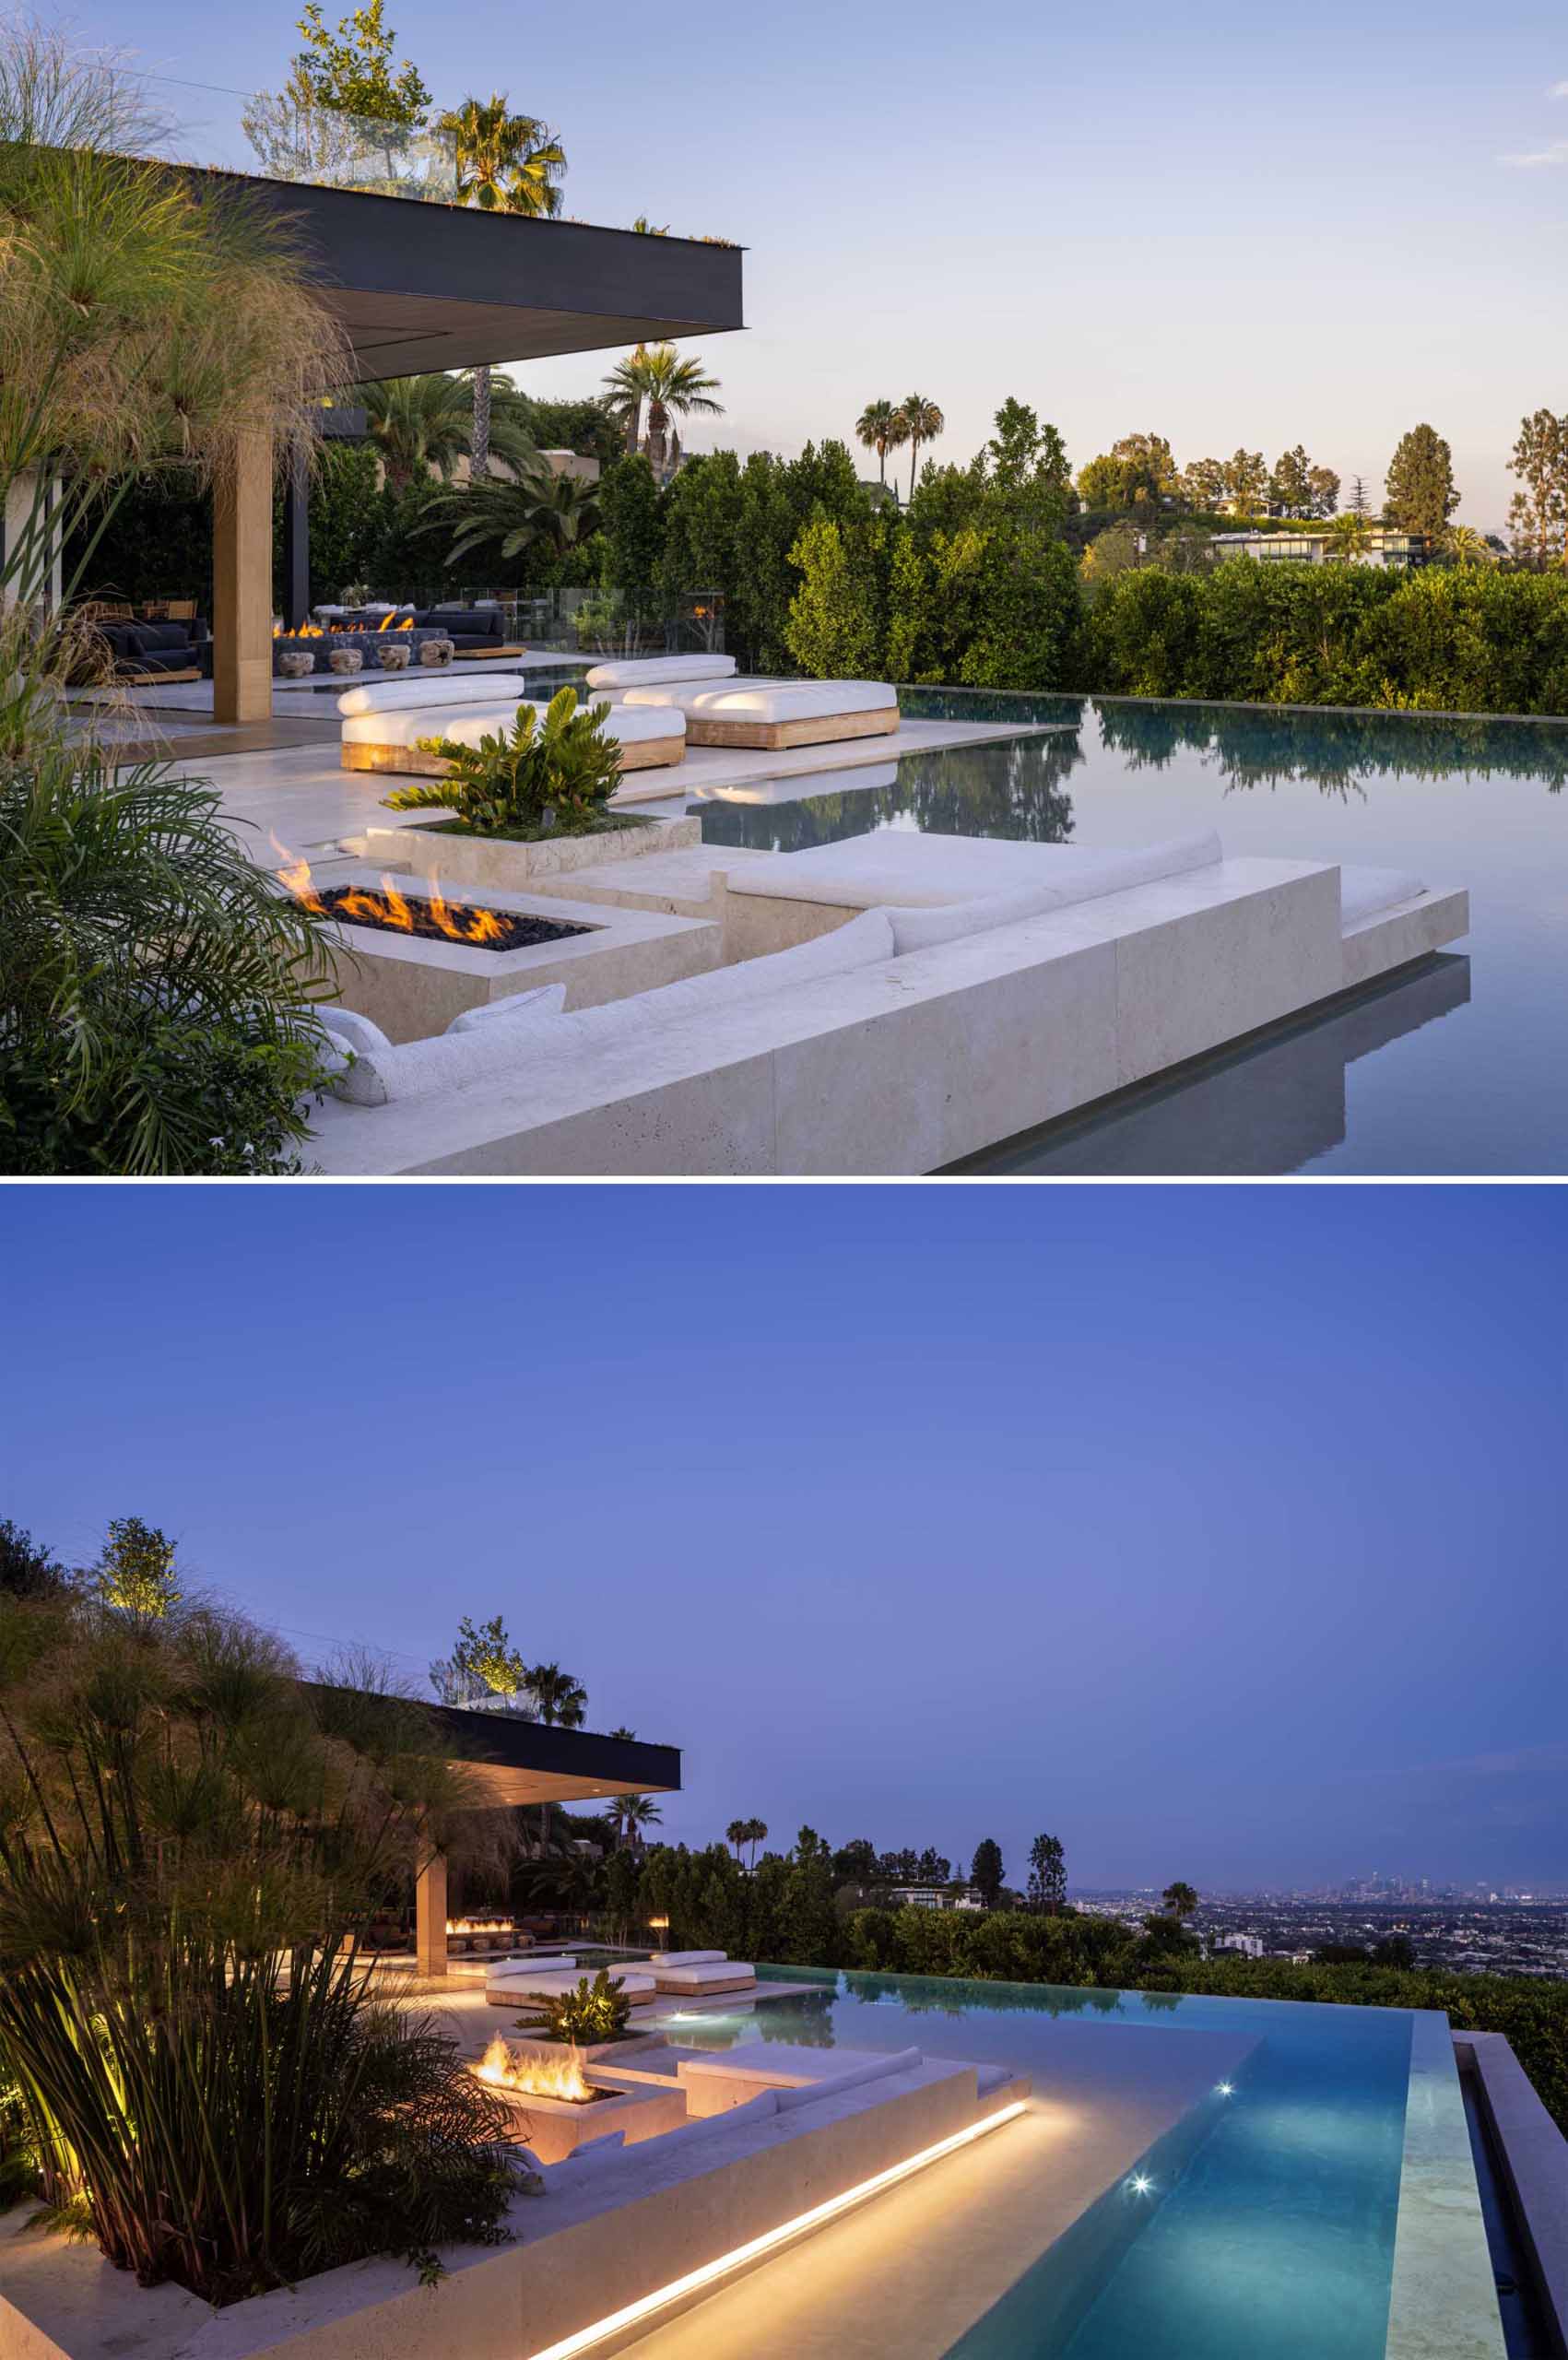 A modern house with a swimming pool and a sunken outdoor living room with a firepit.